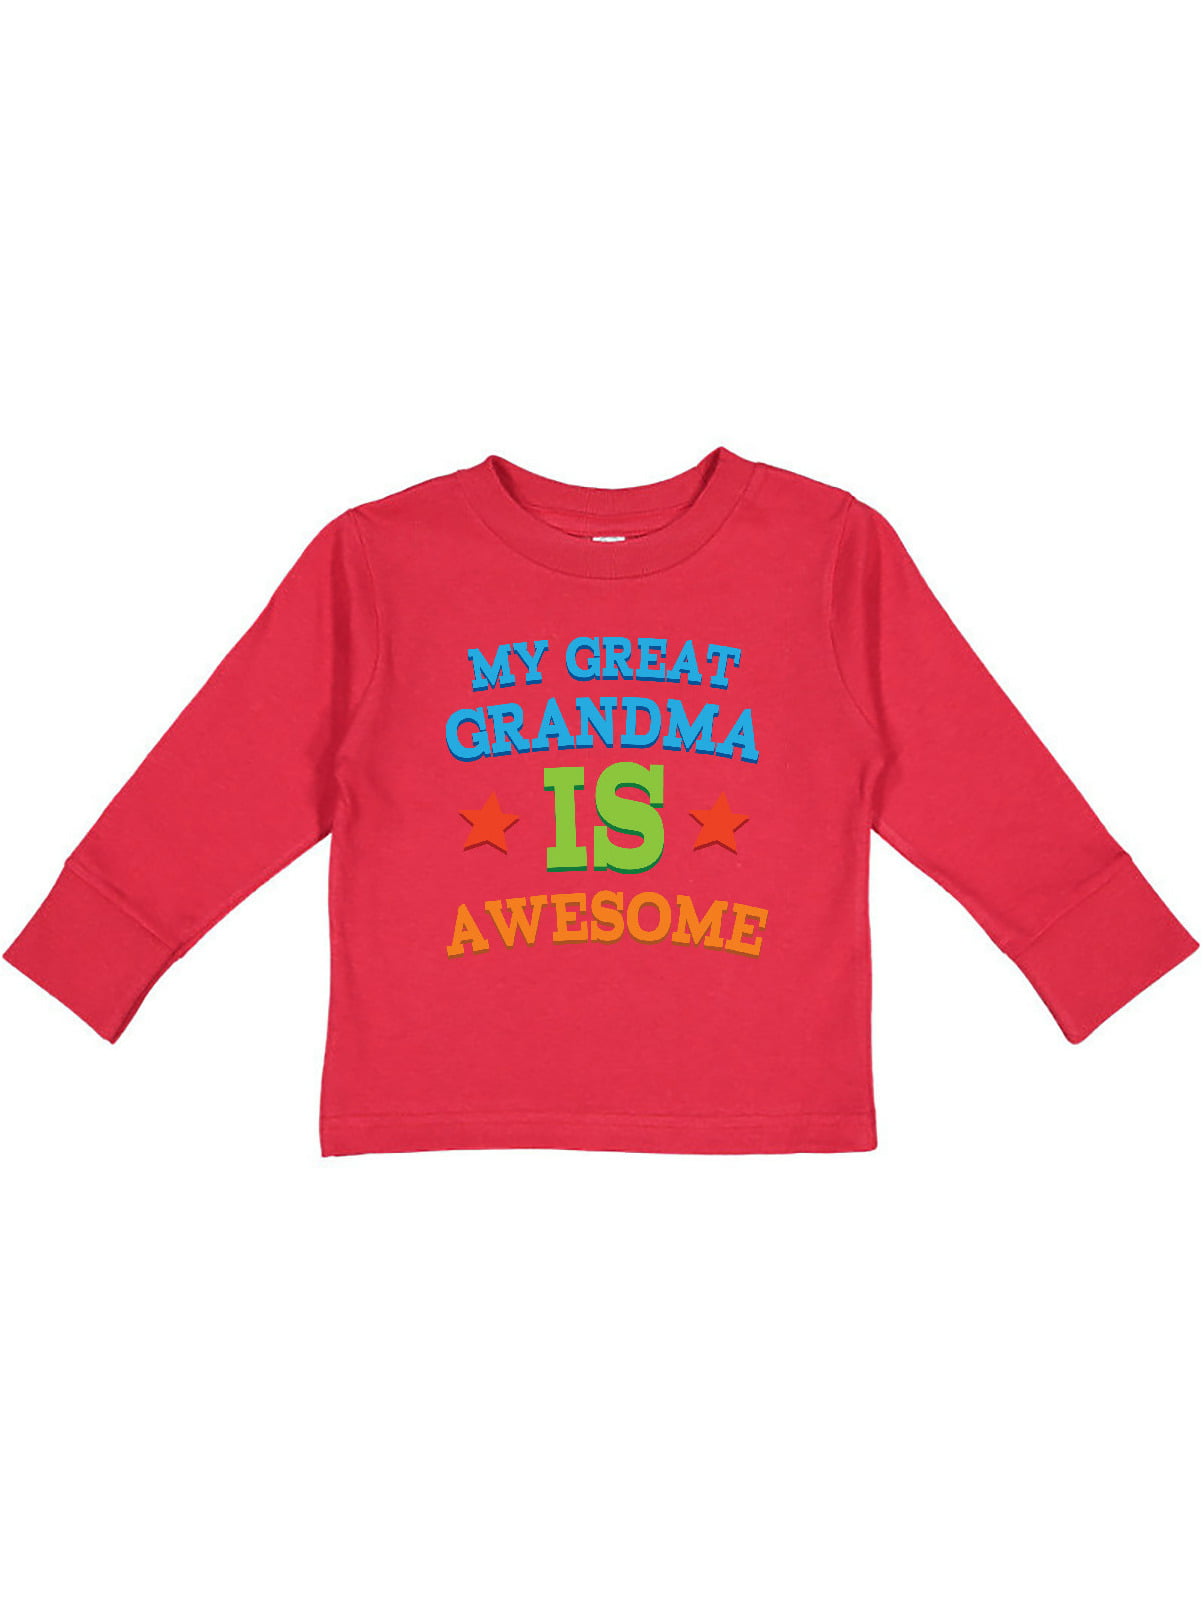 Just Like My Great-Grandma Im Going to Love Dogs When I Grow Up Toddler/Kids Raglan T-Shirt